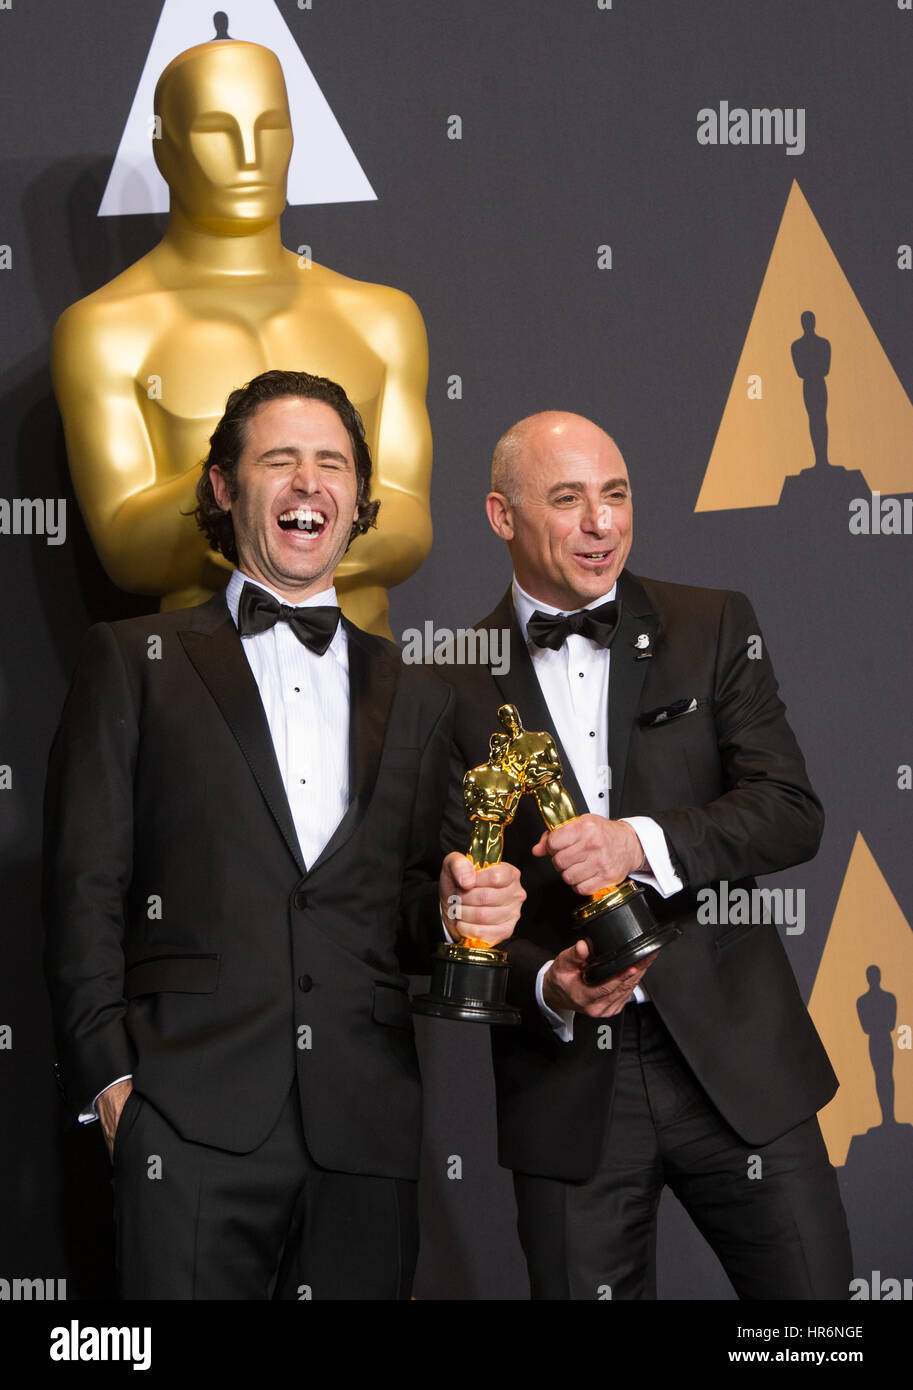 Los Angeles, USA. 26th Feb, 2017. Director Alan Barillaro and producer Marc Sondheimer pose after winning the Best Animated Short Film award for 'Piper' at press room of the 89th Academy Awards at the Dolby Theater in Los Angeles, the United States, on Feb. 26, 2017. Credit: Yang Lei/Xinhua/Alamy Live News Stock Photo